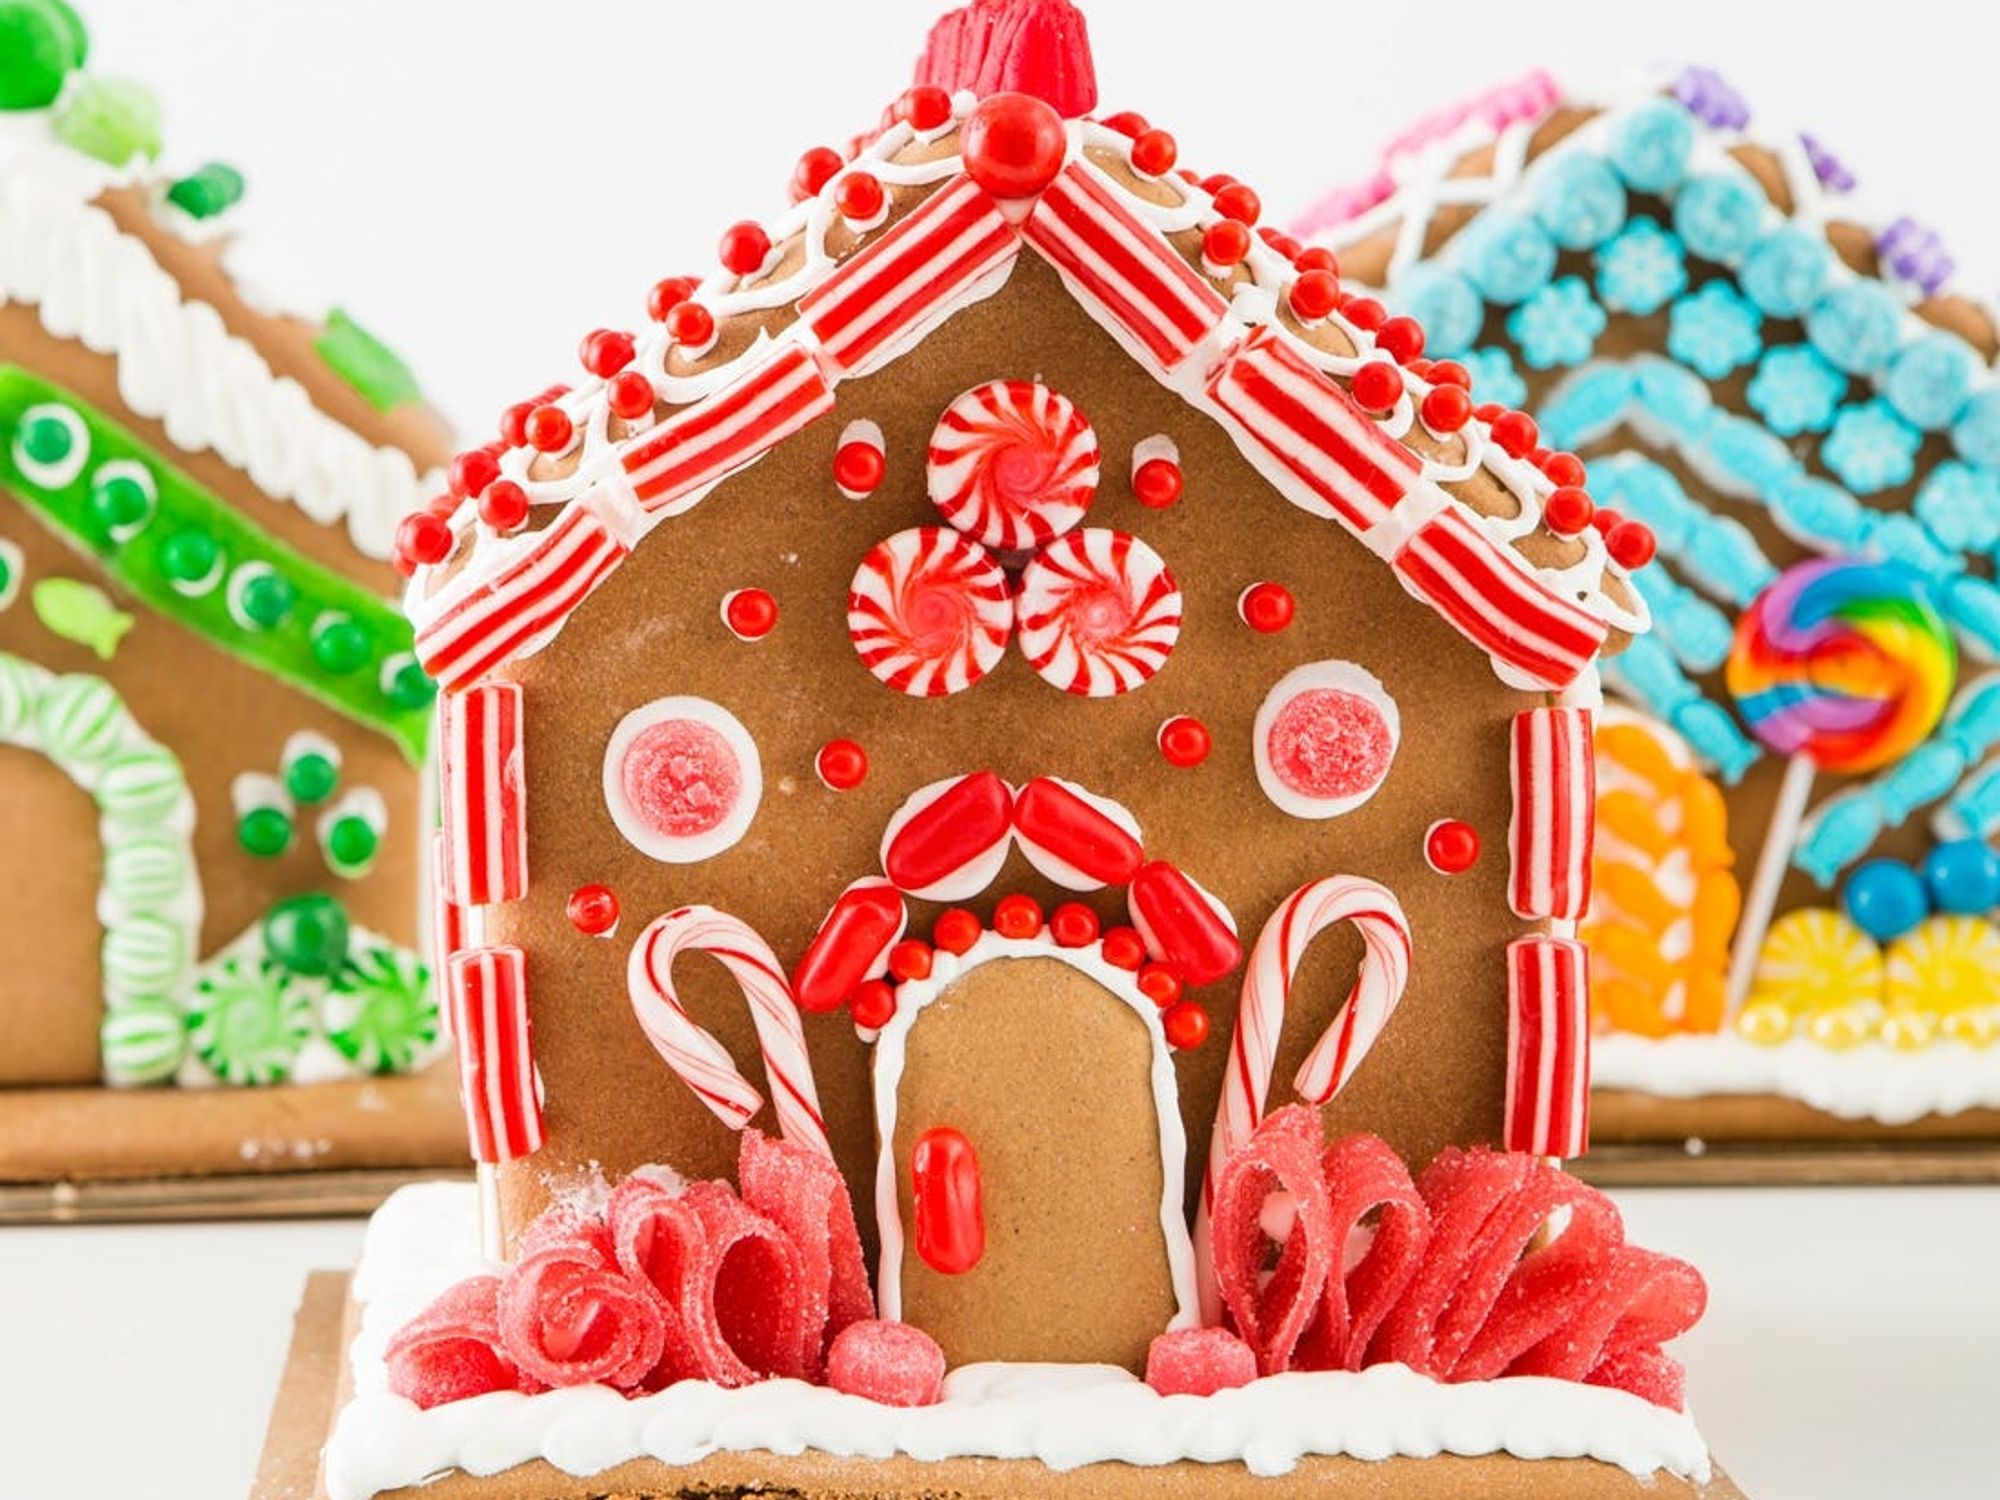 https://www.brit.co/media-library/multicolored-gingerbread-house-decorations.jpg?id=20940599&width=2000&height=1500&coordinates=0%2C116%2C0%2C117